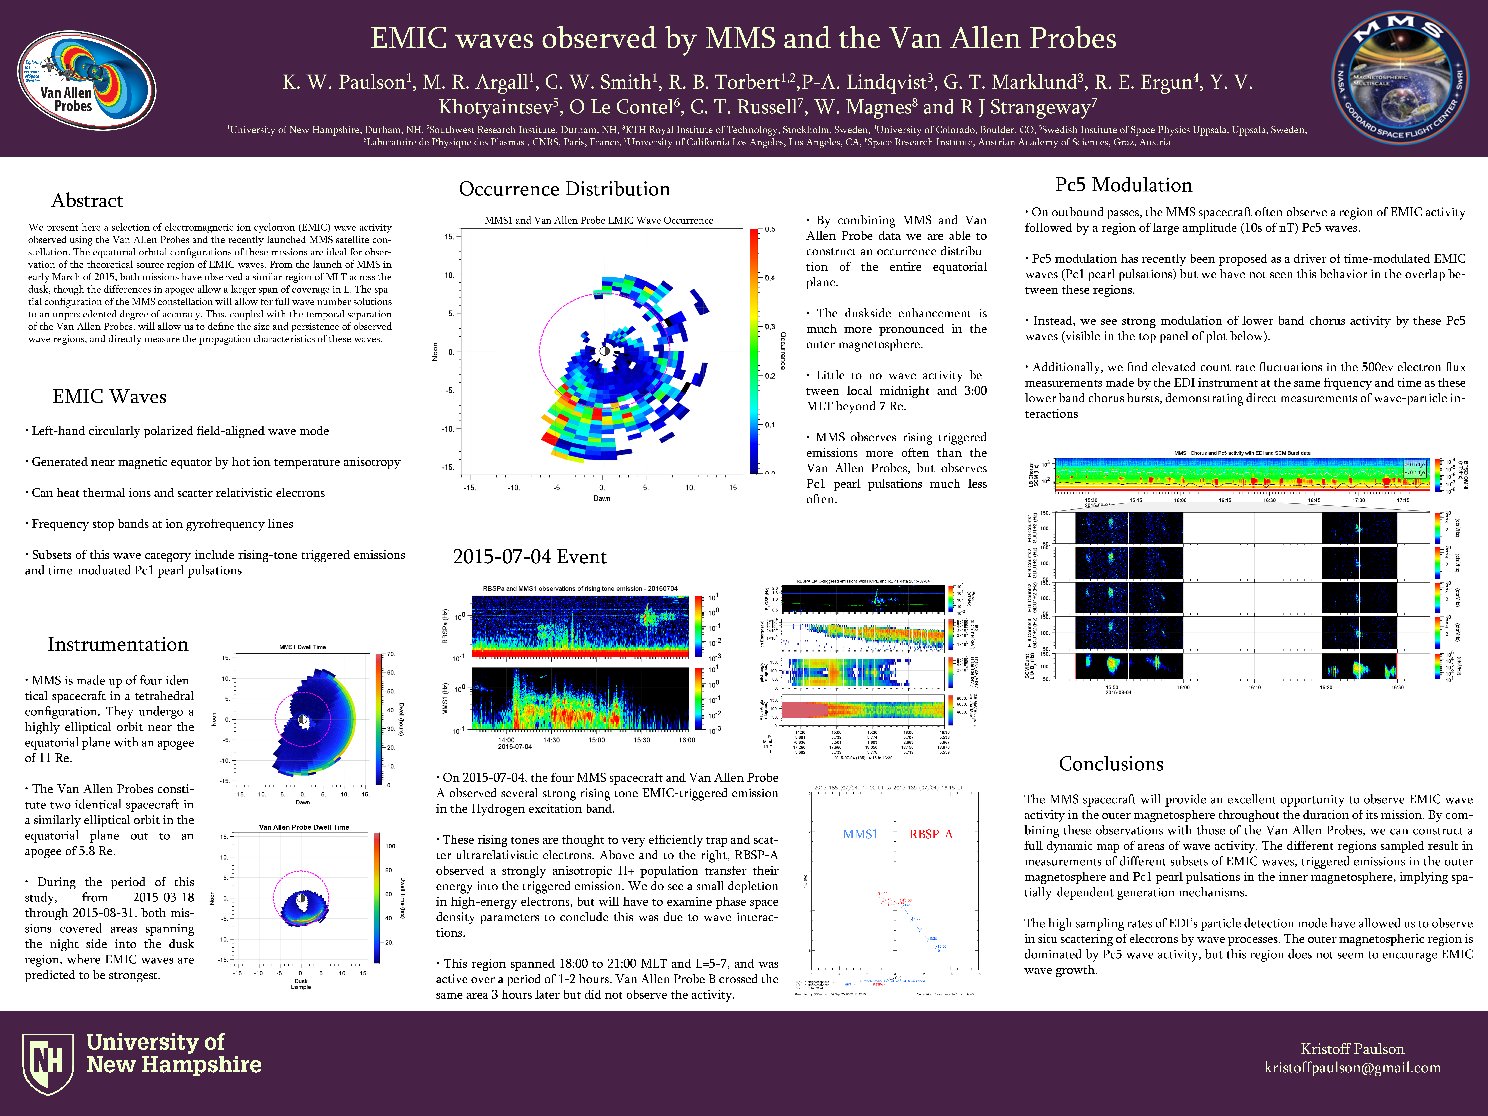 Emic Waves Observed By Mms And The Van Allen Probes by mry27